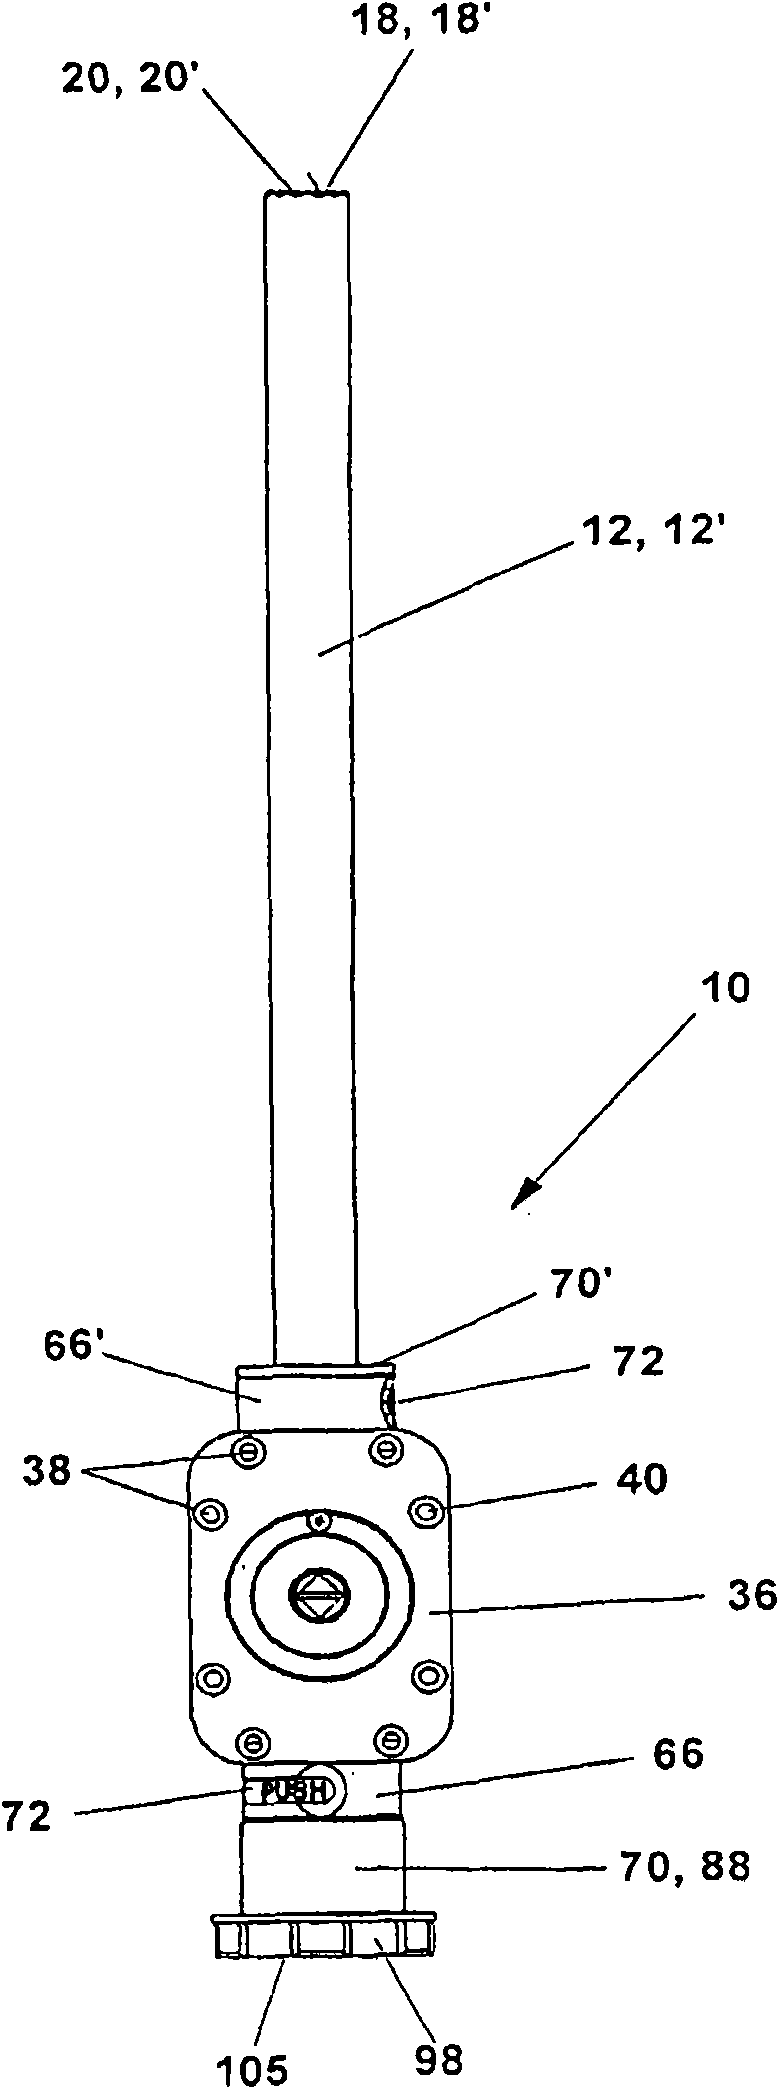 Apparatus for cutting out and removing tissue cylinders from a tissue, and use thereof